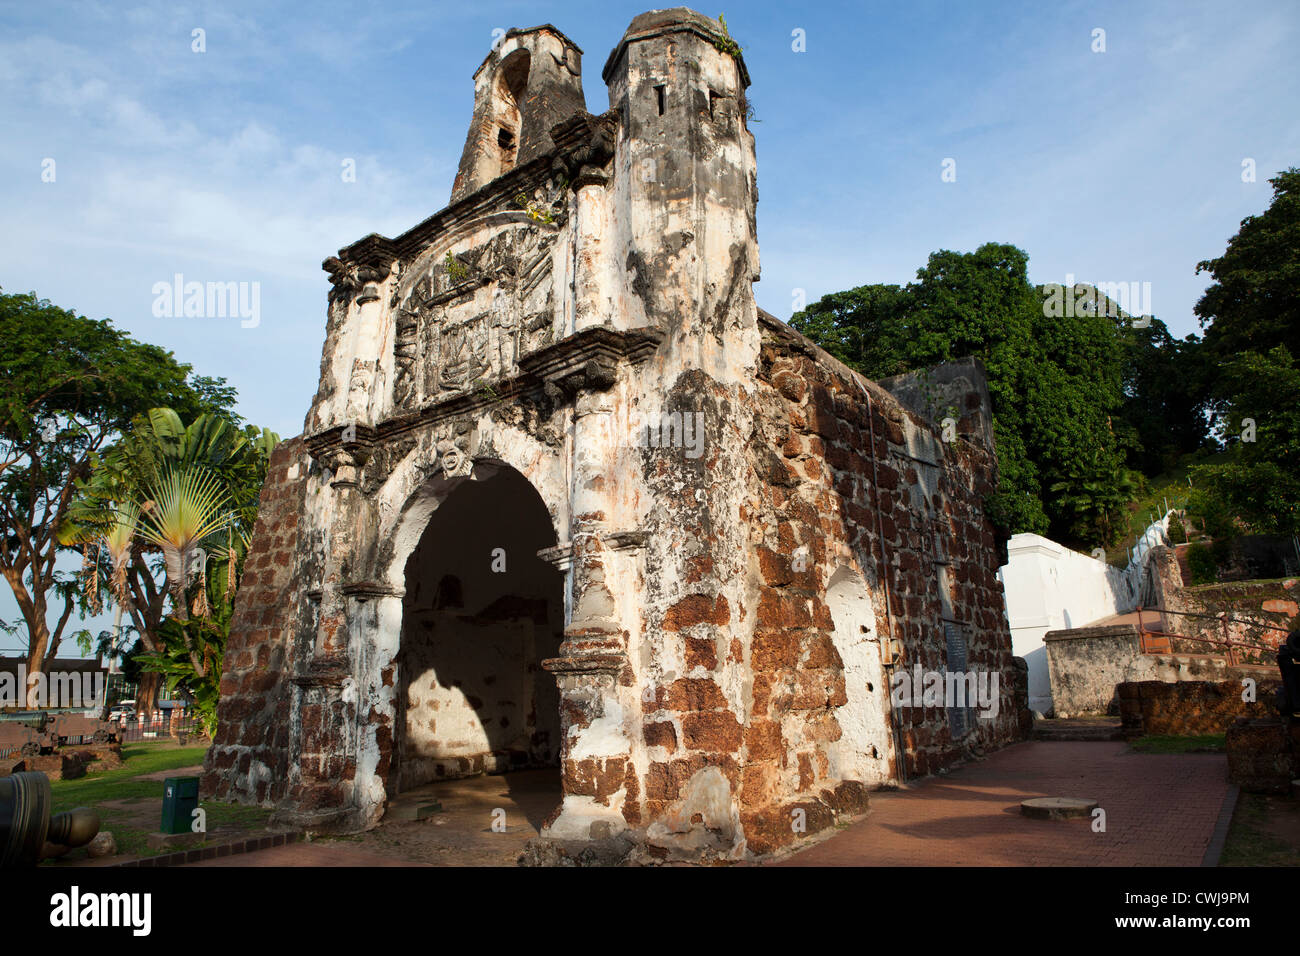 A Famosa, 'The Famous' in Portuguese, is a Portuguese fortress located in Malacca Stock Photo